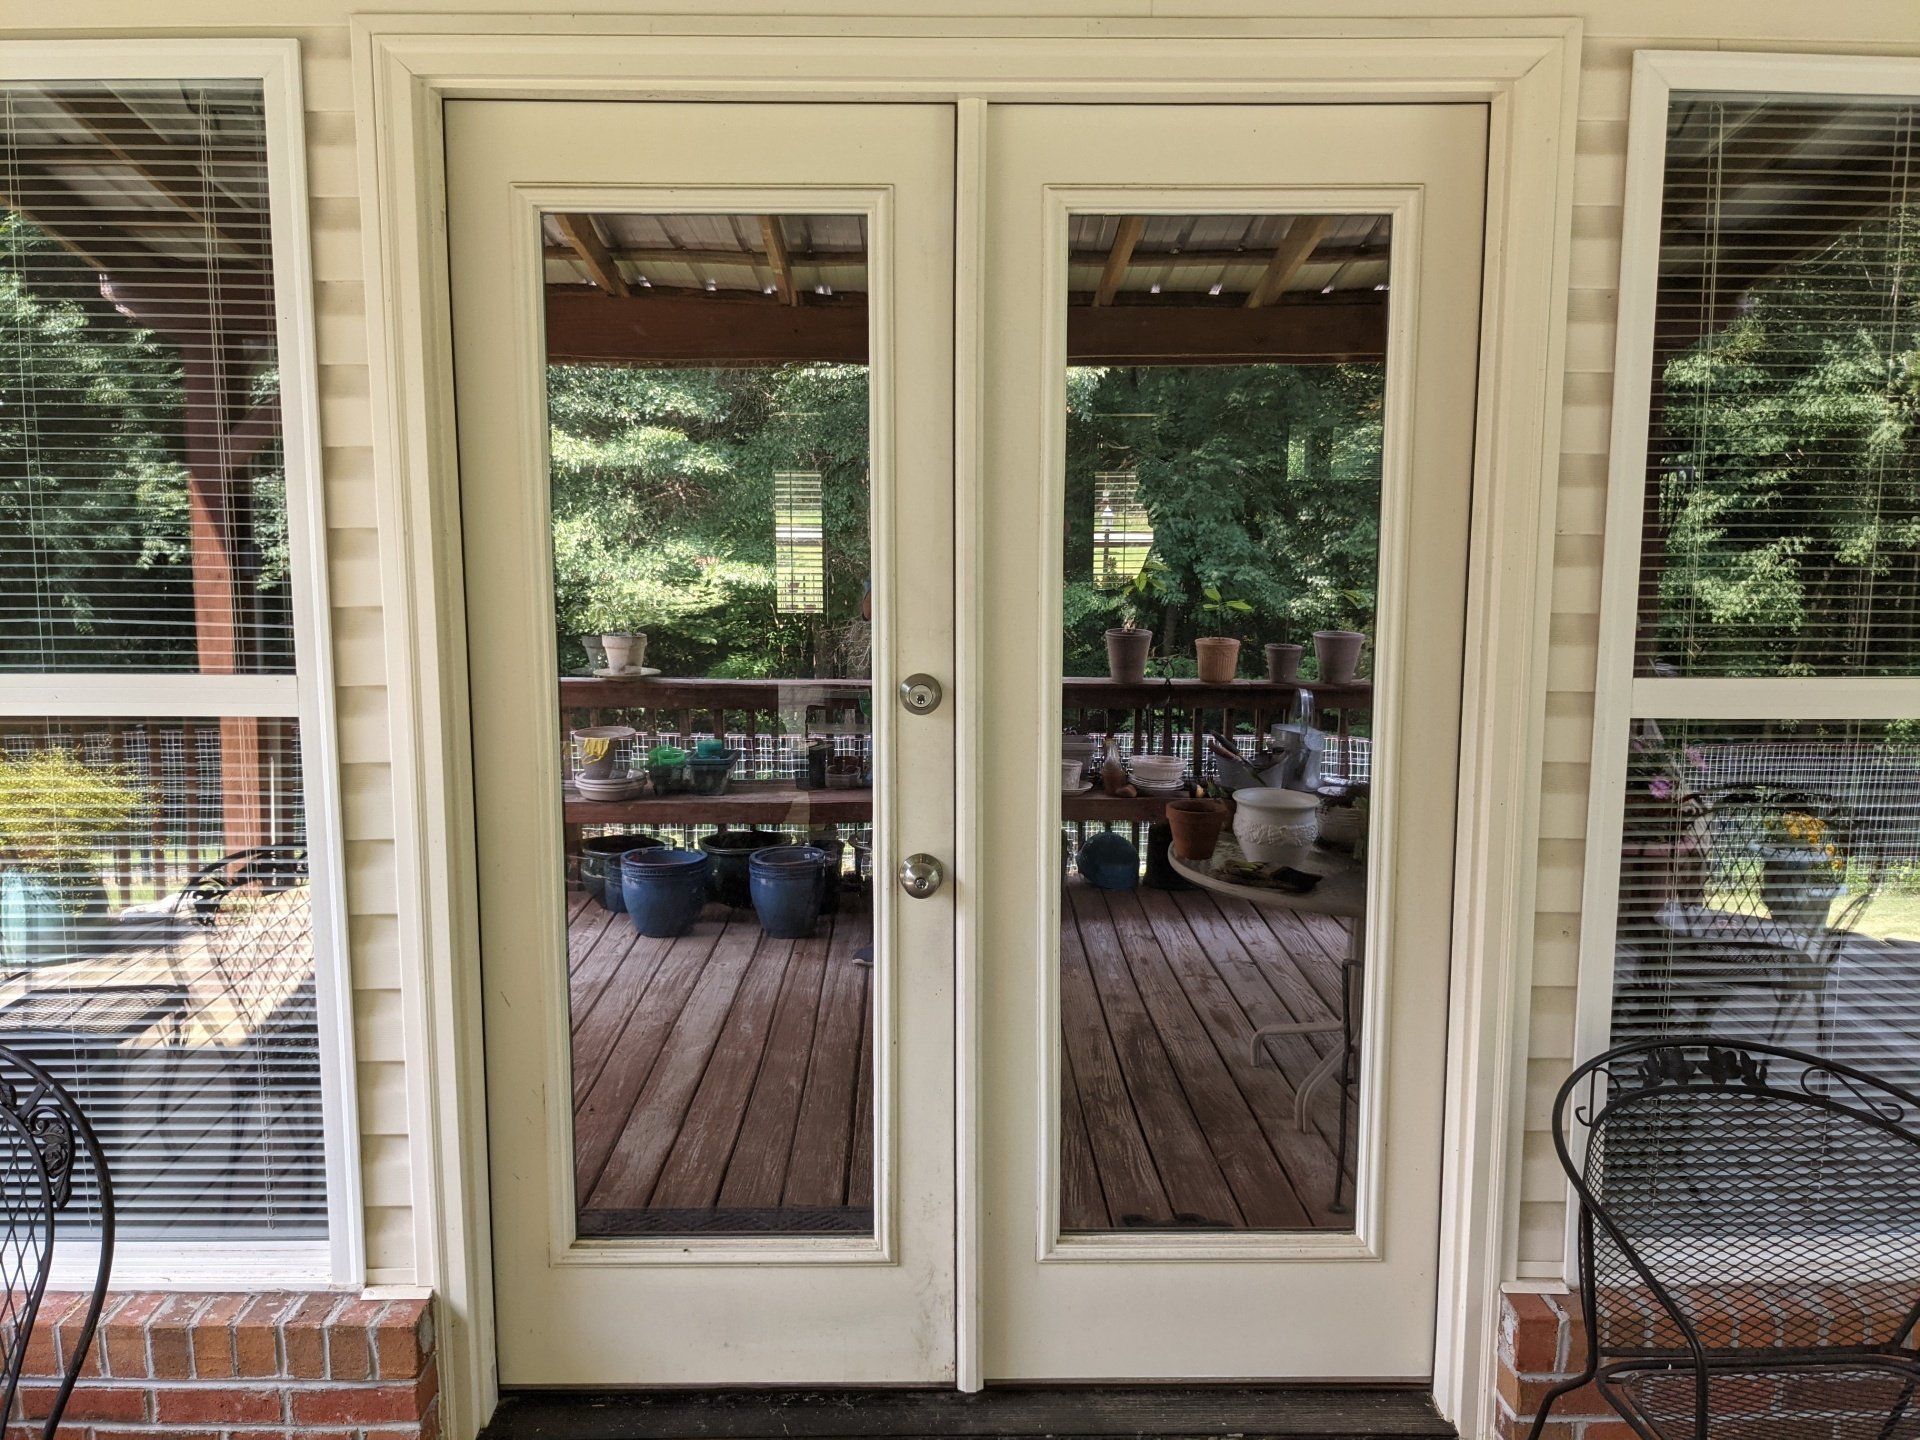 Home improvement incentives PLUS privacy optional glass doors in Wetumpka, AL - SPF Residential Tint Blocked Heat Gain & UV-Sun Damage in Wetumpka, AL